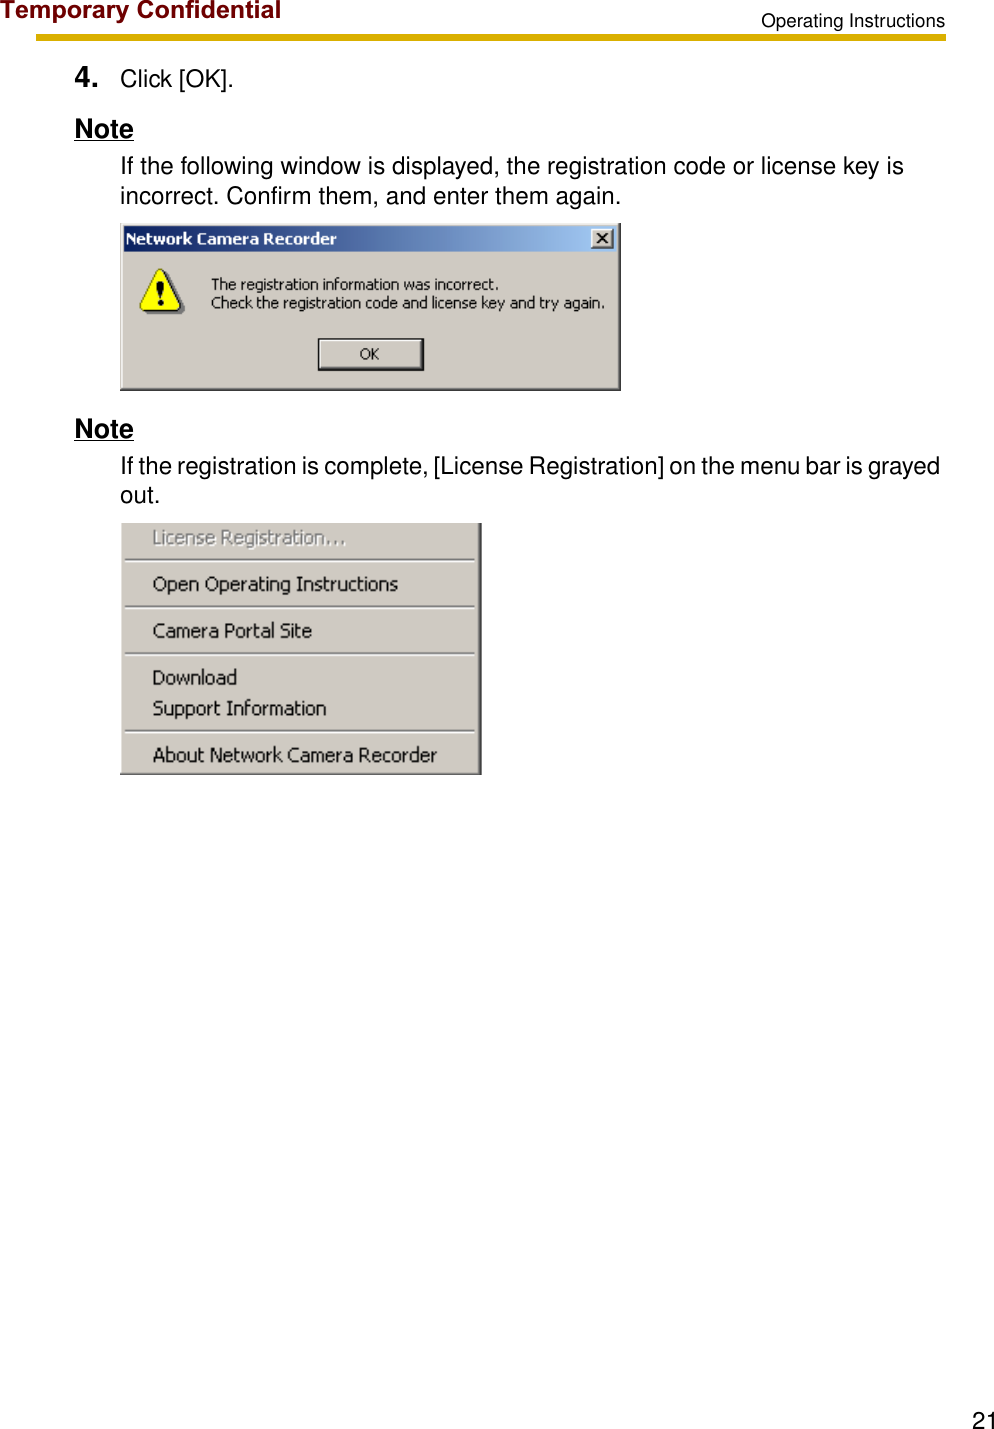 Operating Instructions214. Click [OK].NoteIf the following window is displayed, the registration code or license key is incorrect. Confirm them, and enter them again.NoteIf the registration is complete, [License Registration] on the menu bar is grayed out.Temporary Confidential